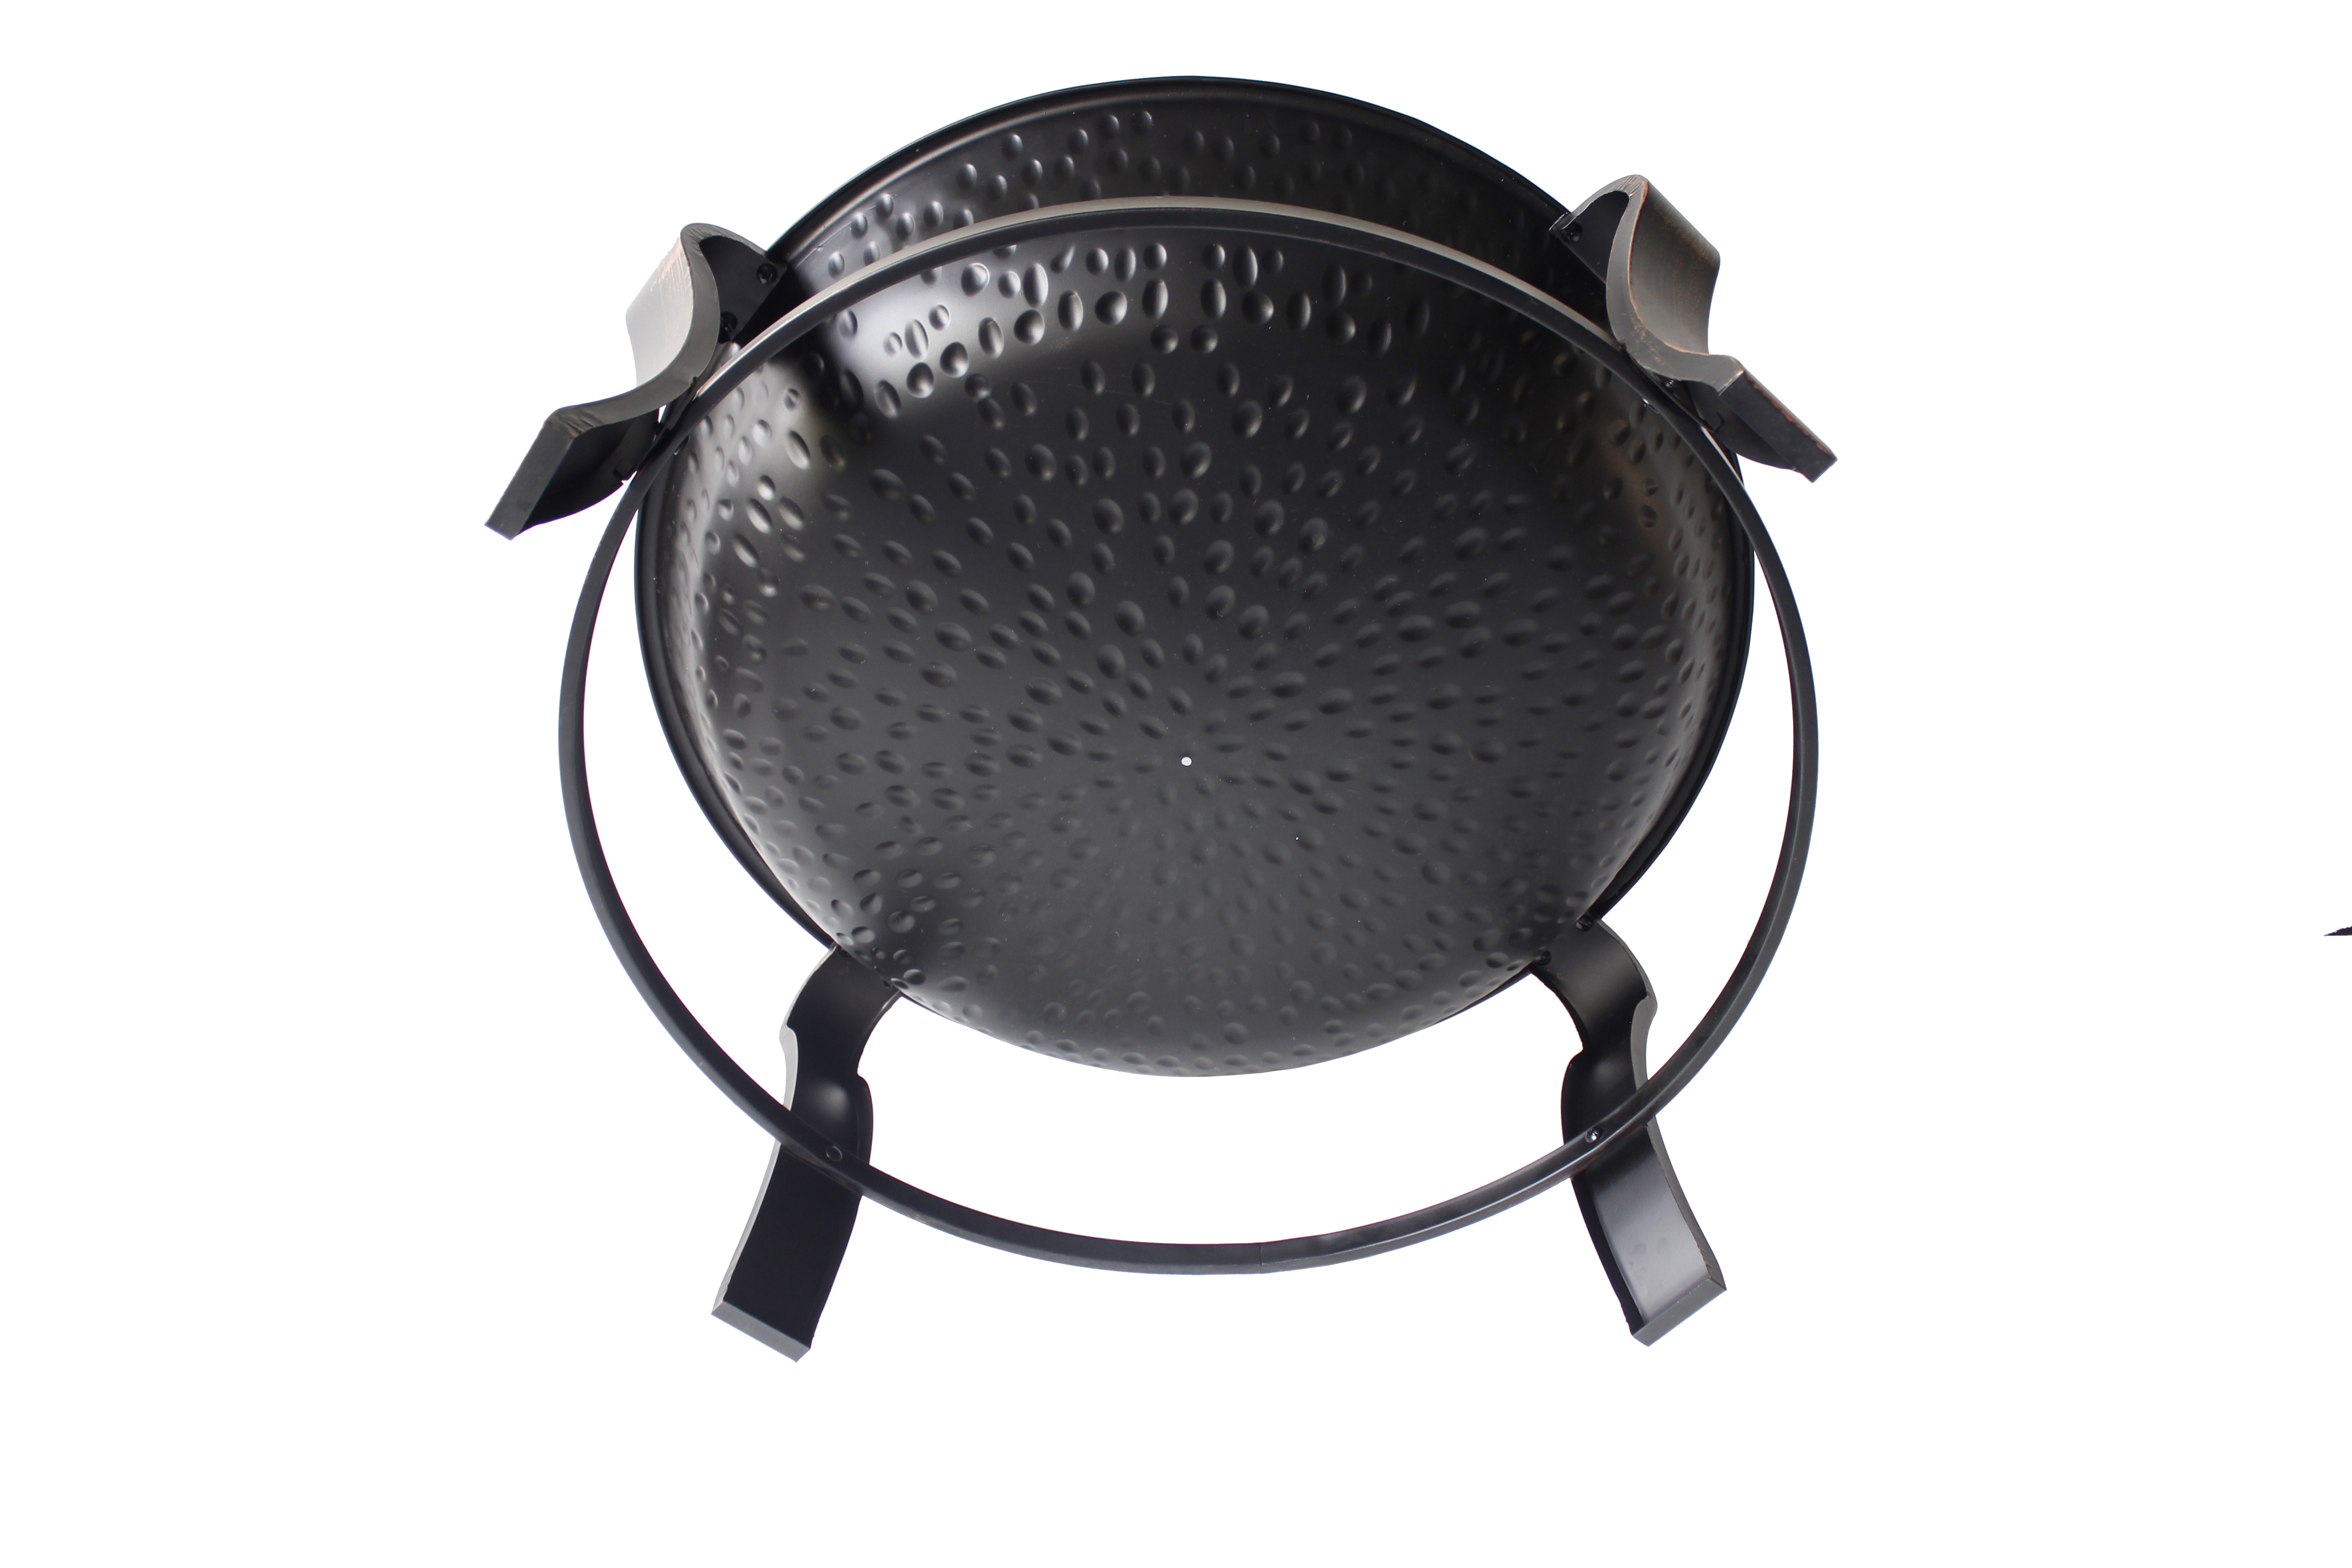 Mainstays Owen Park 28-Inch Round Wood Burning Fire Pit with Mesh Spark Guard - image 5 of 8